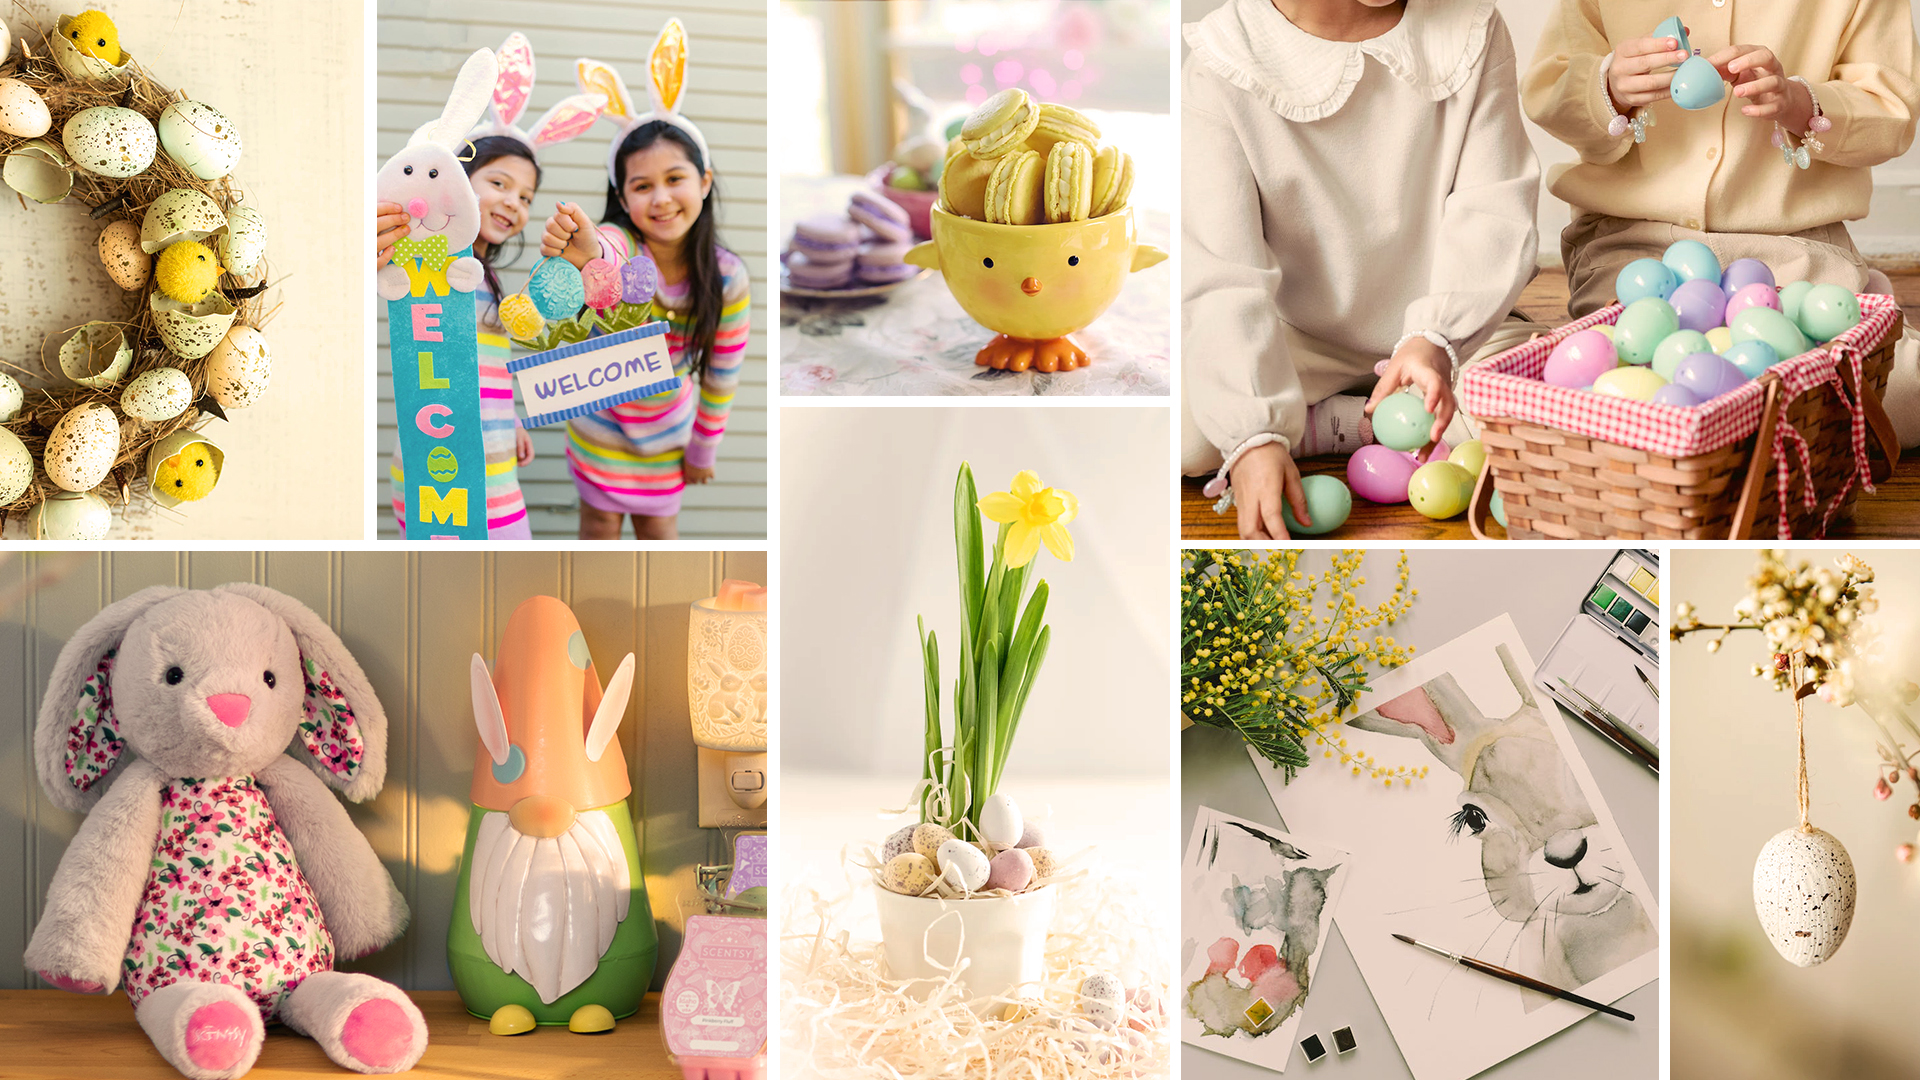 Expert tips for your Easter décor